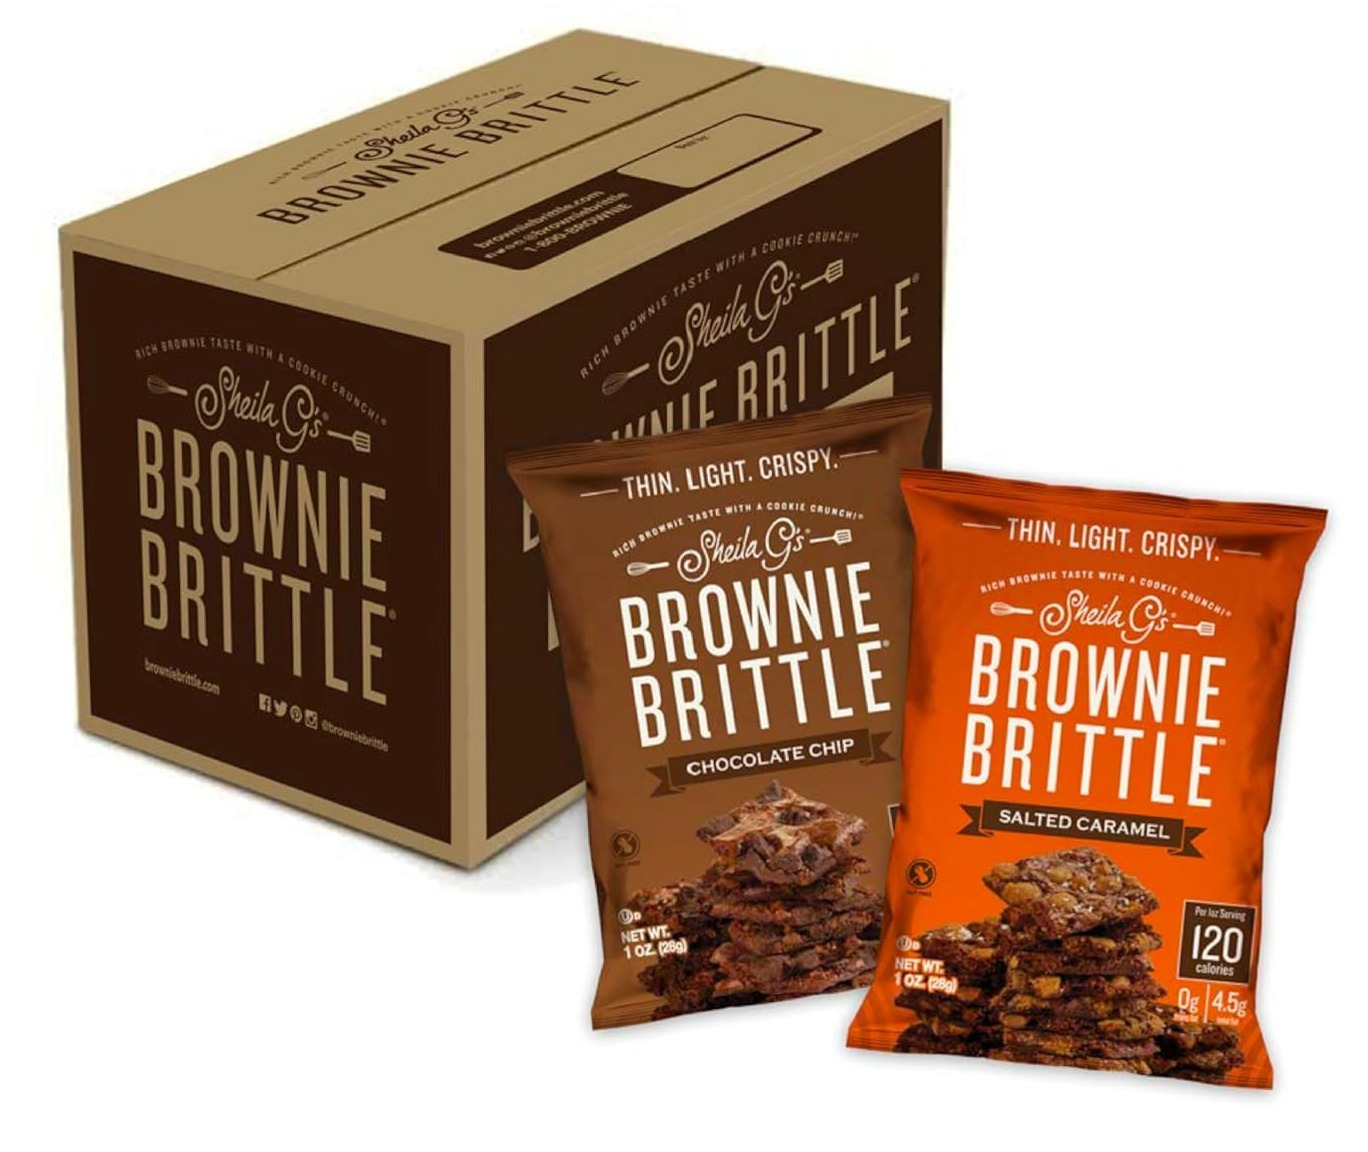 $9.15 /w S&S: 20-Count 1-Oz Sheila G's Brownie Brittle (Chocolate Chip & Salted Caramel) Amazon